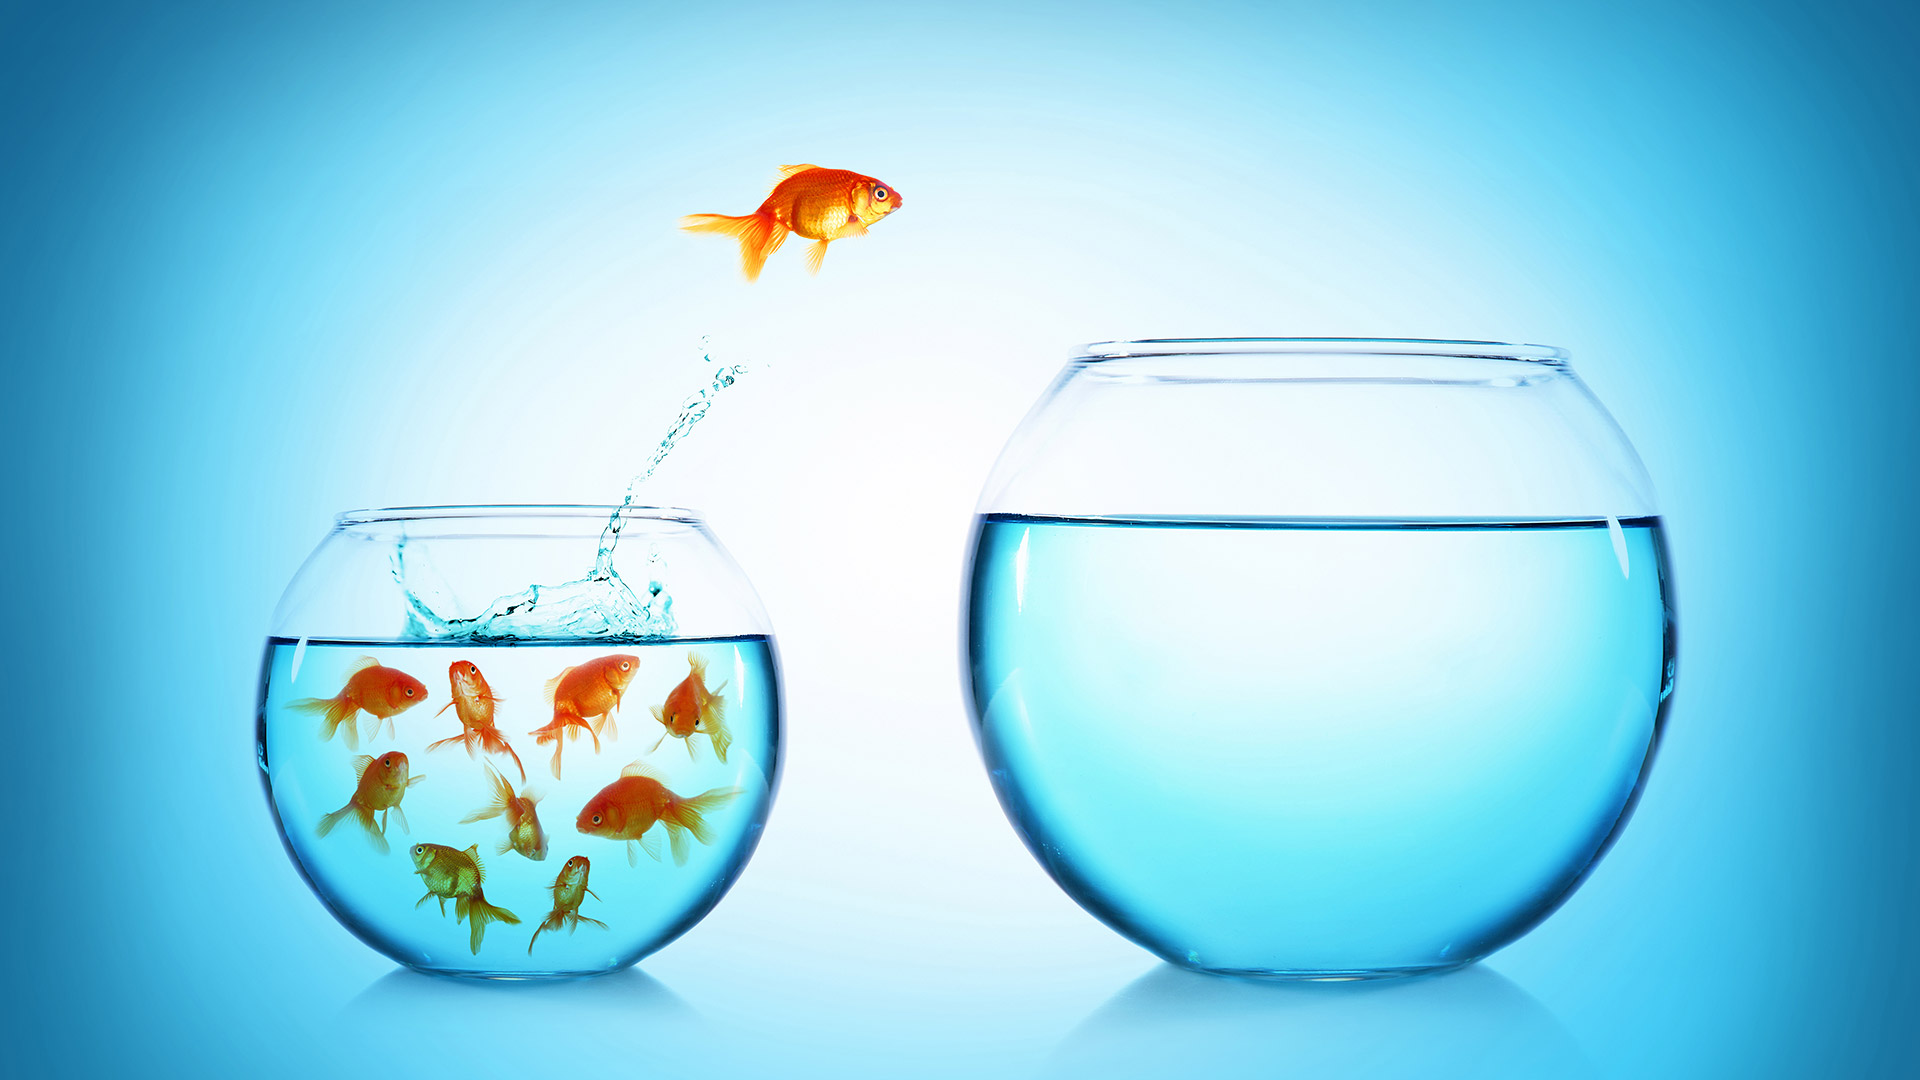 Goldfish jumping from small crowded fish bowl to big, empty one